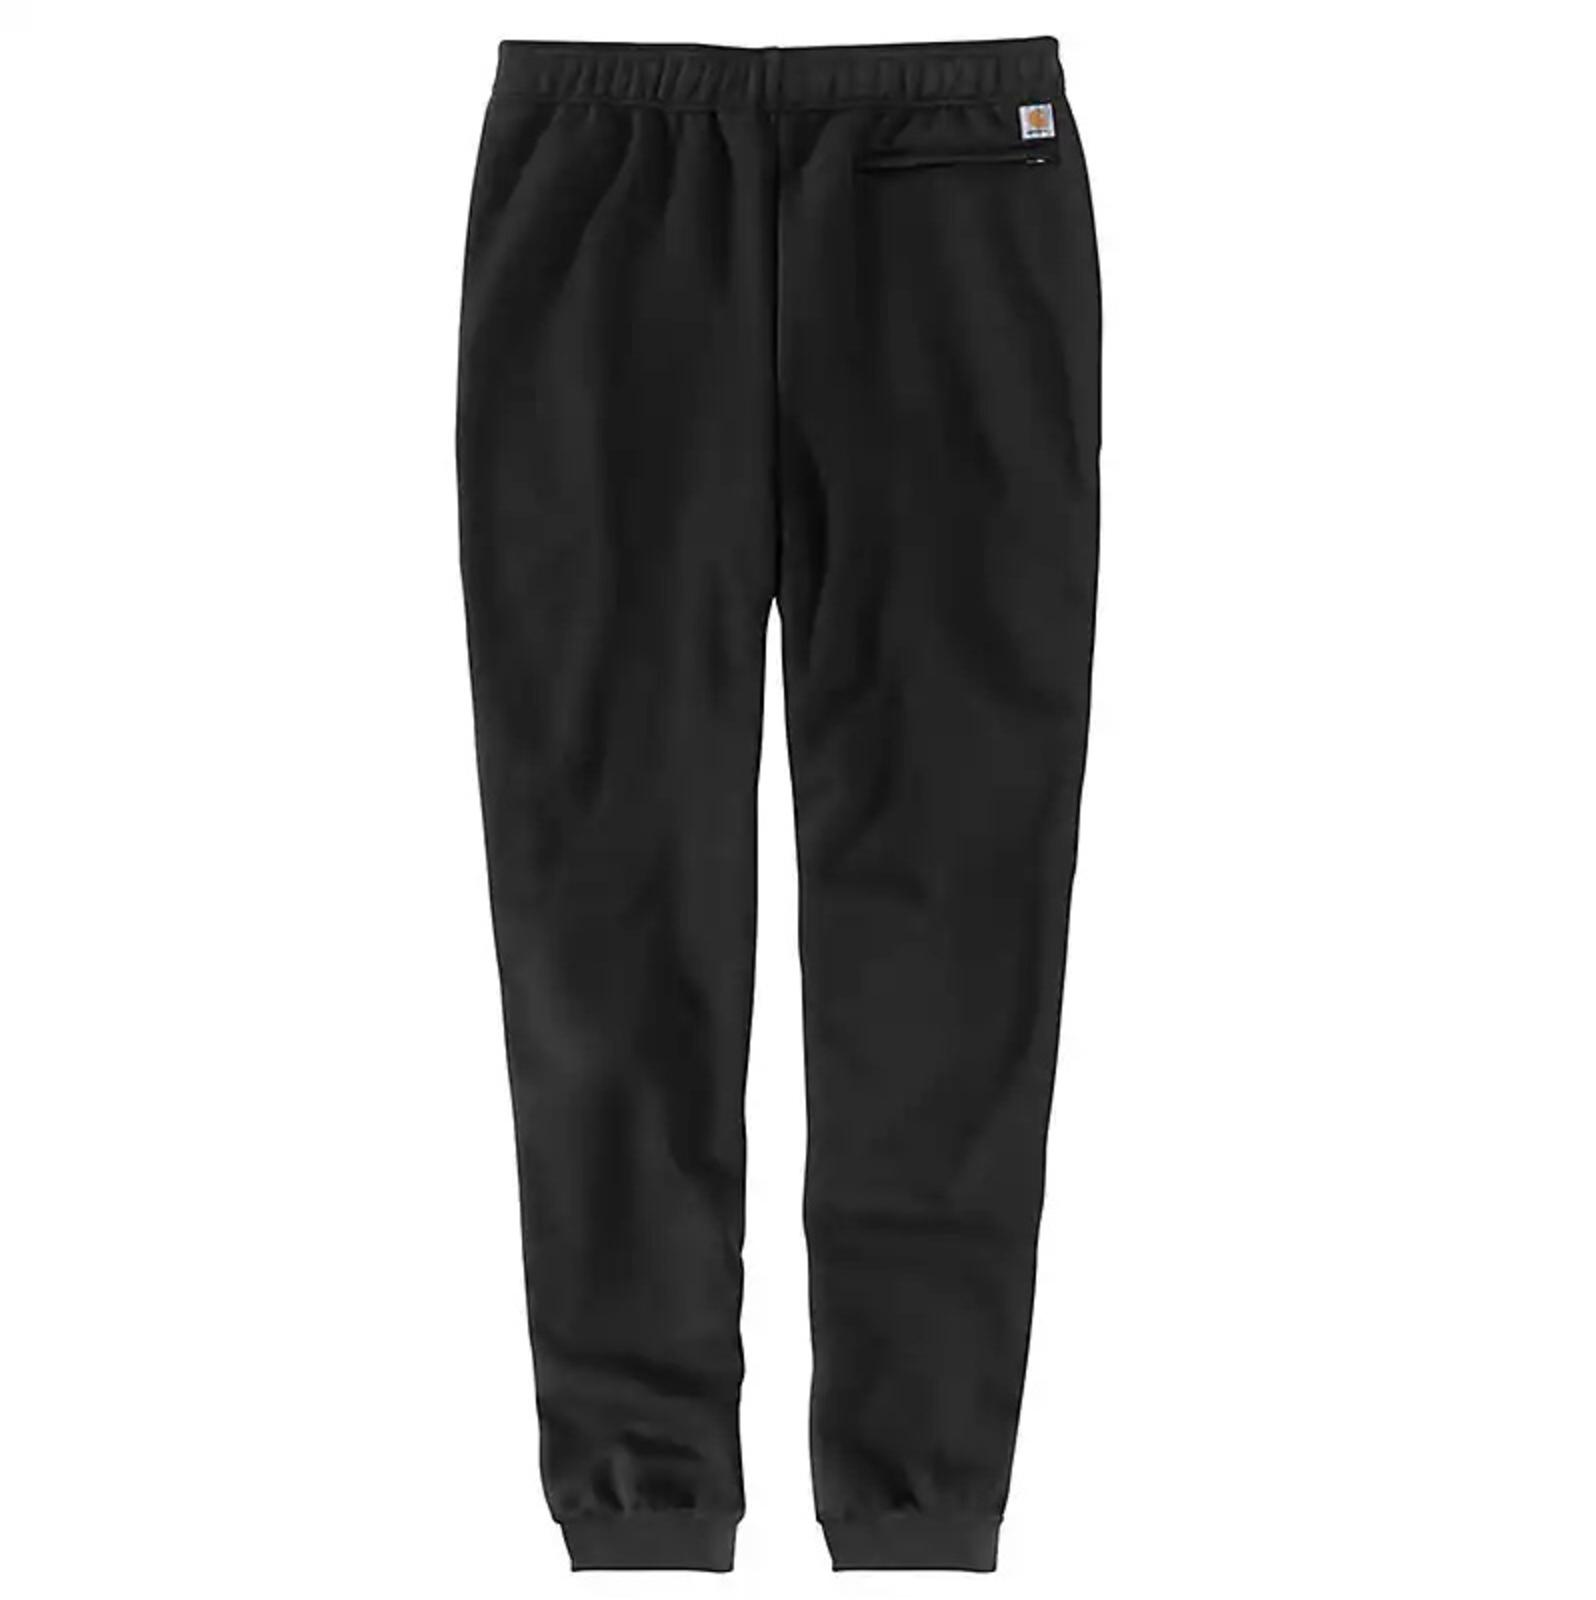 Carhartt Loose Fit Midweight Tapered Sweatpants